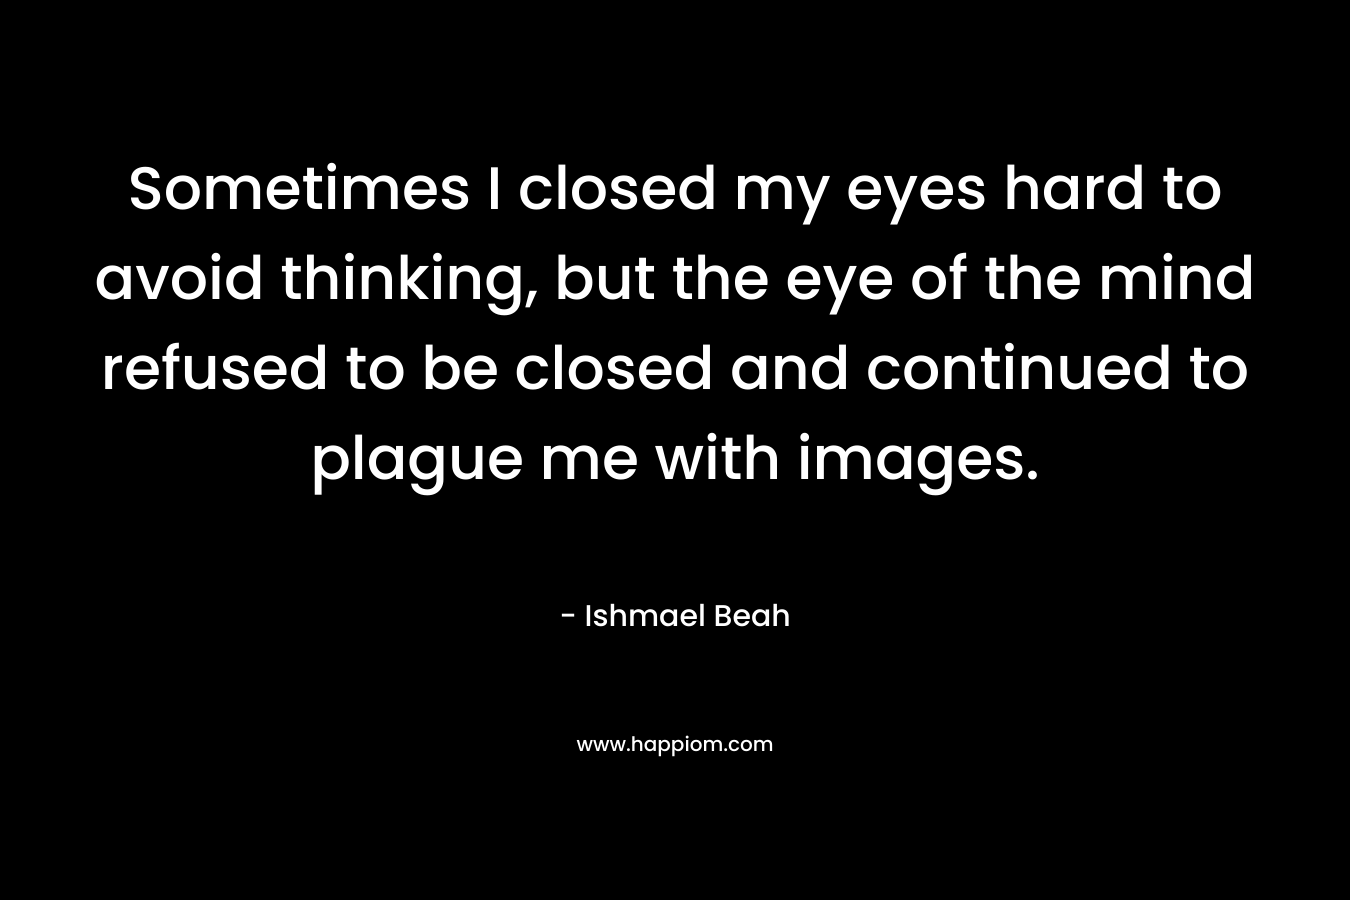 Sometimes I closed my eyes hard to avoid thinking, but the eye of the mind refused to be closed and continued to plague me with images.